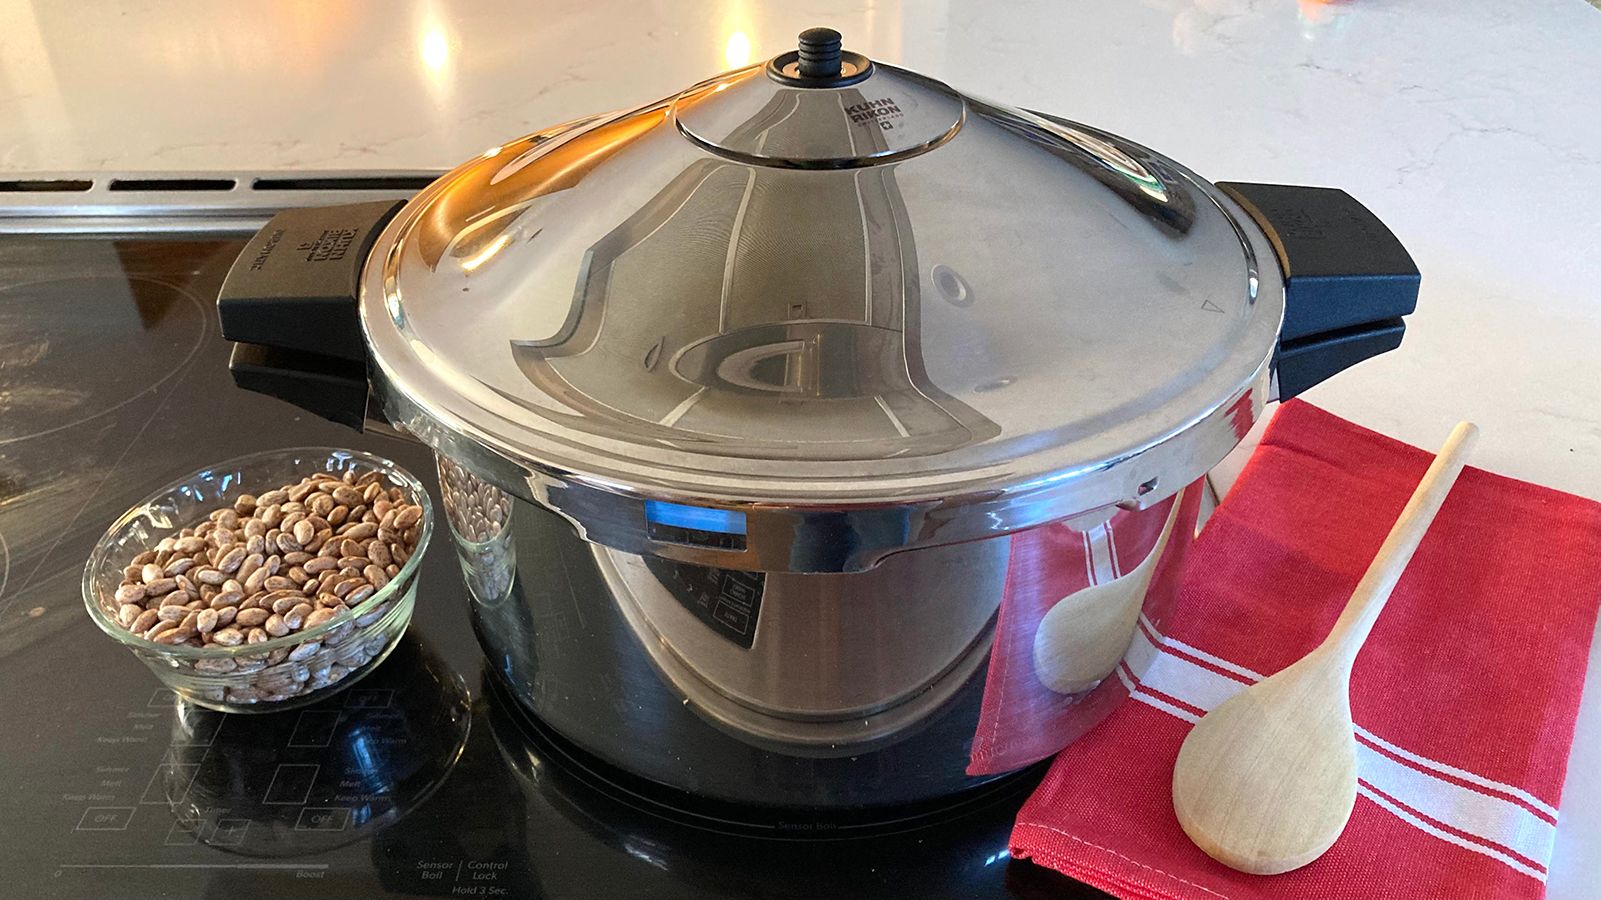 The 10 best pressure cookers of 2022, per reviews